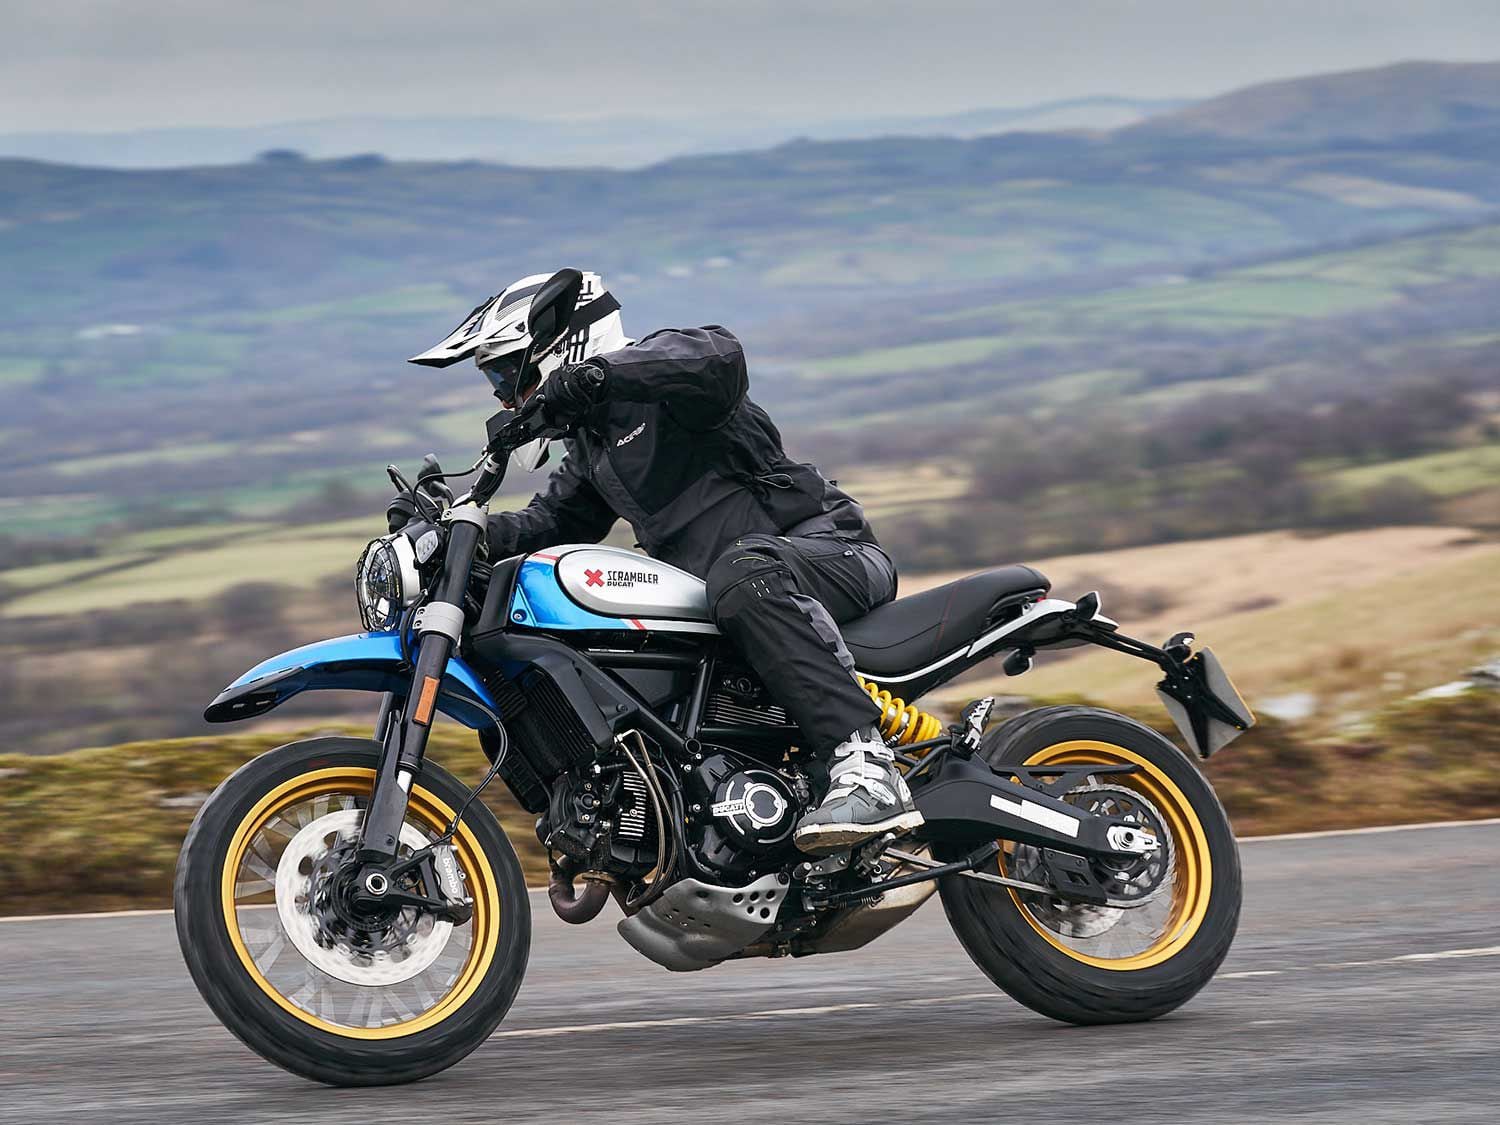 On the road, the Ducati Scrambler Desert Sled is a chilled-out ride—a sort of different take on mild adventure riding.